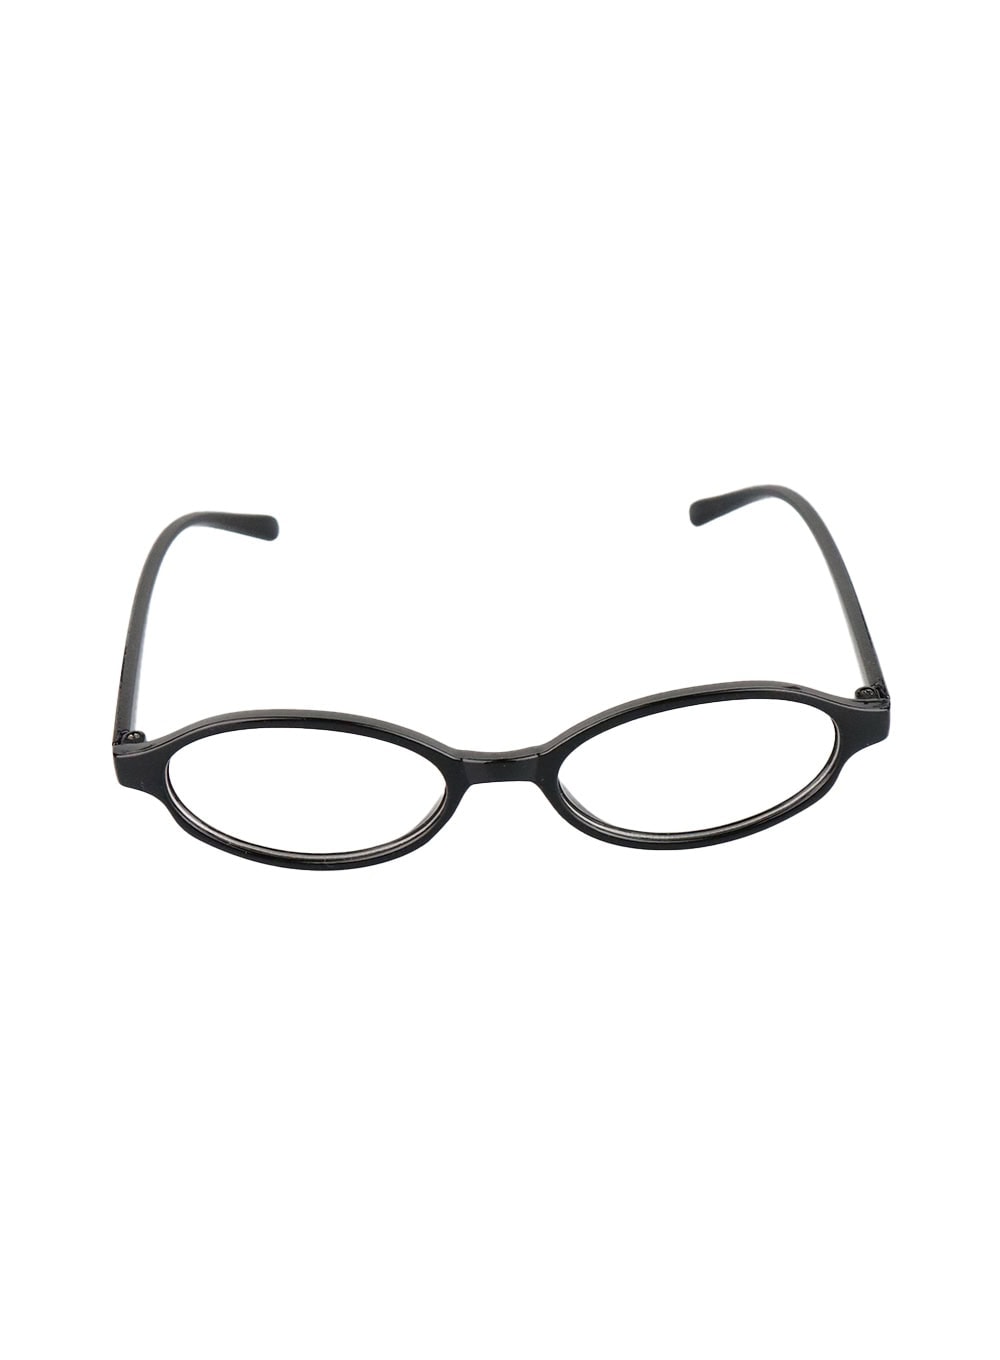 trendy-tint-solid-glasses-cy414